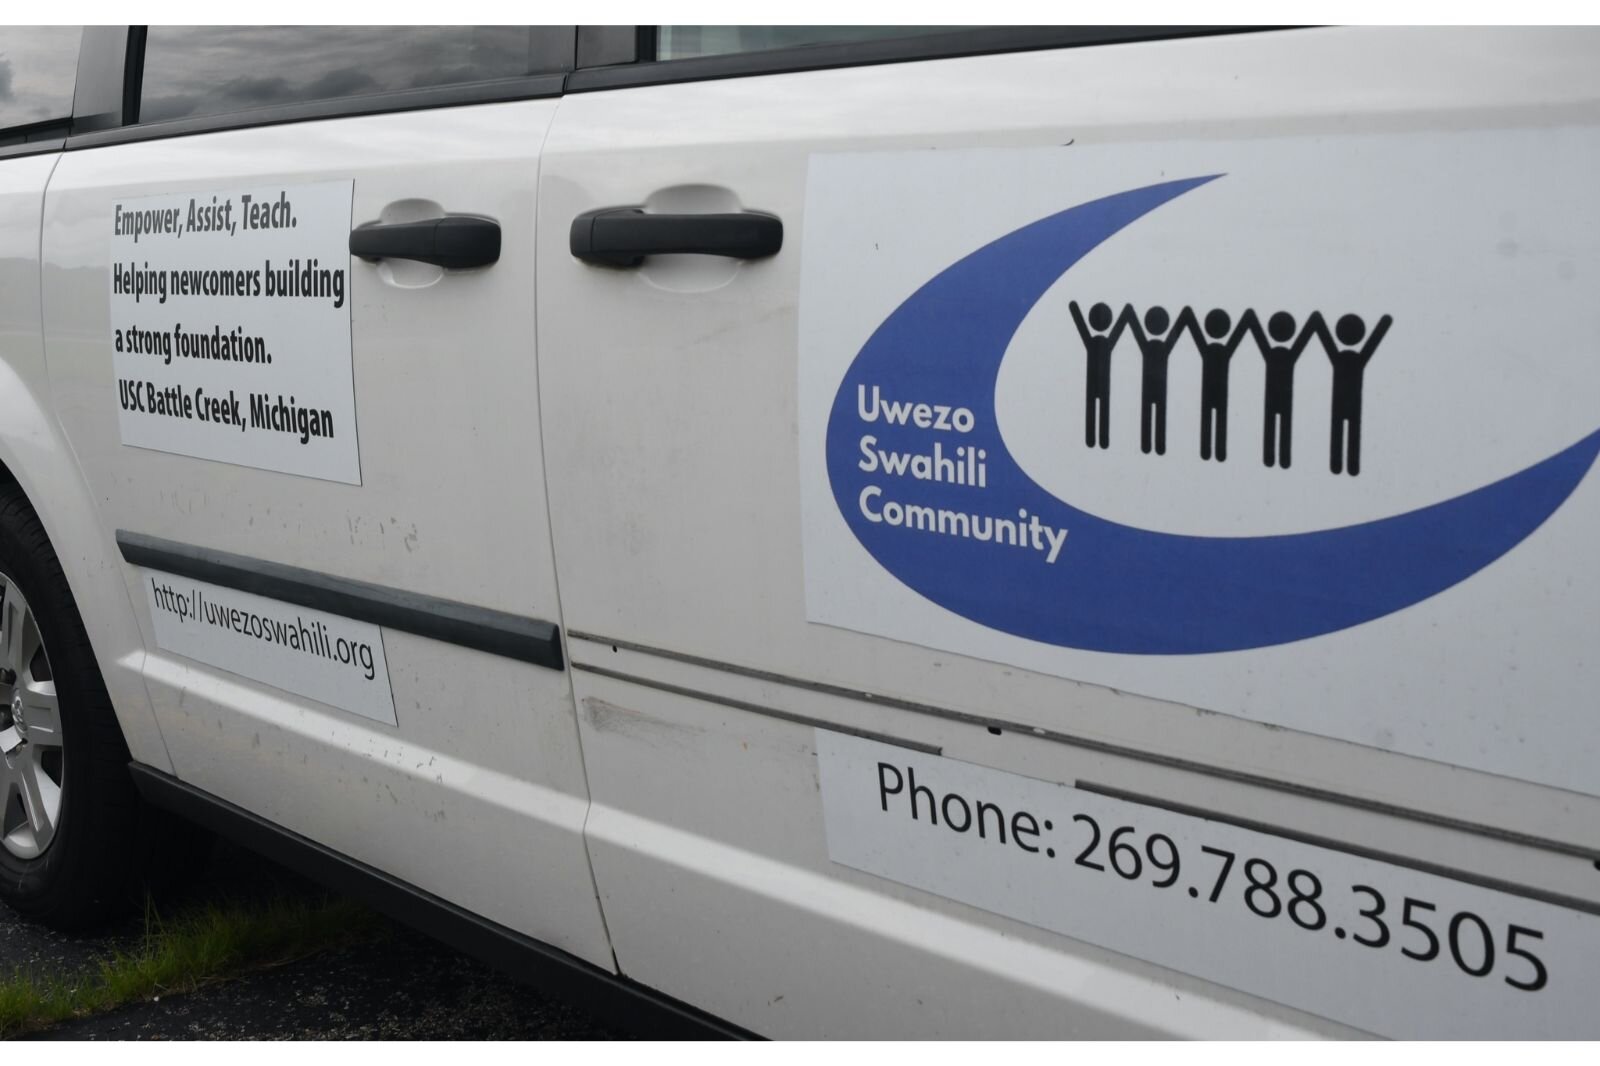 This van is used by members of the the Uwezo Swahili Community. 